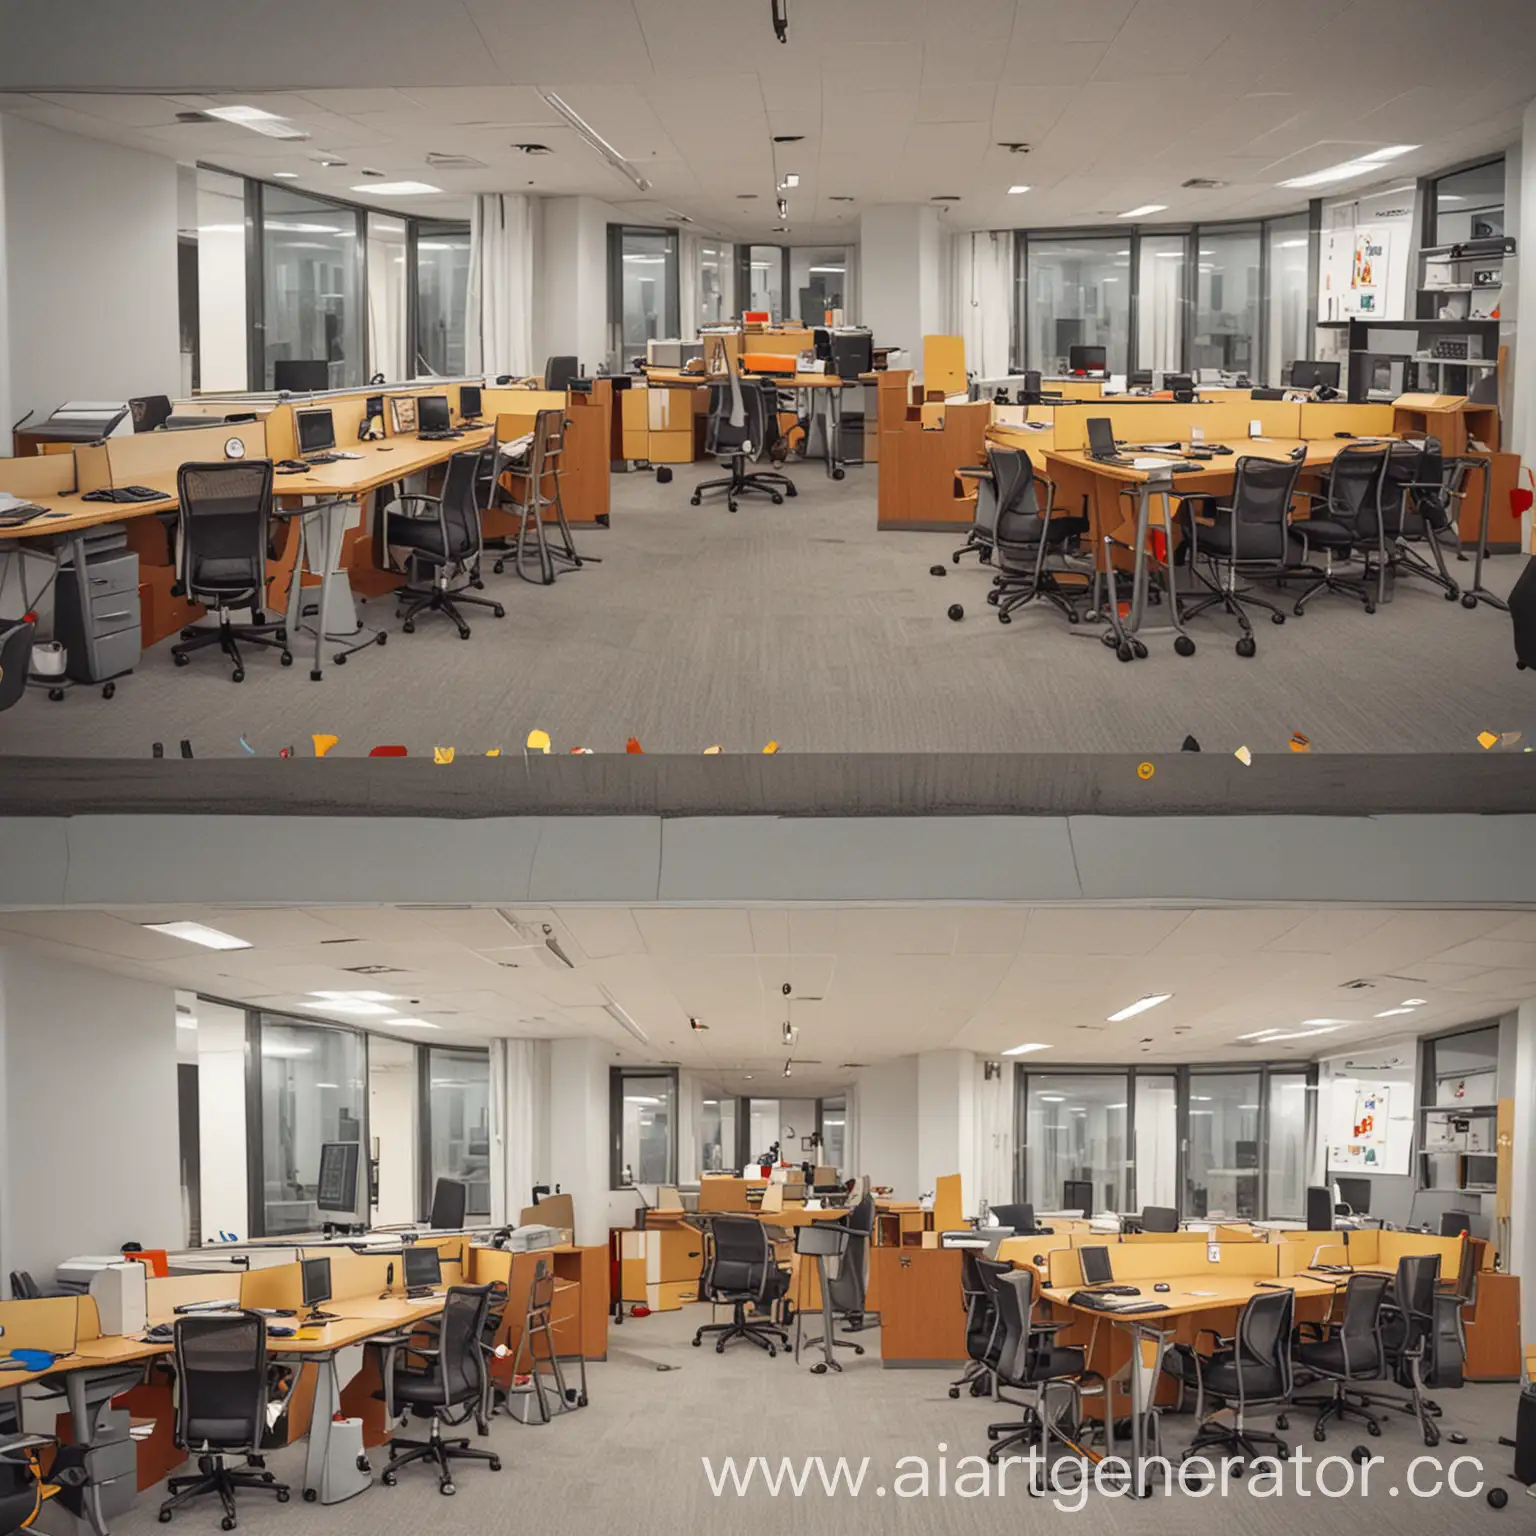 Spot-the-Differences-in-Yandex-Office-Engaging-Find-the-Differences-Game